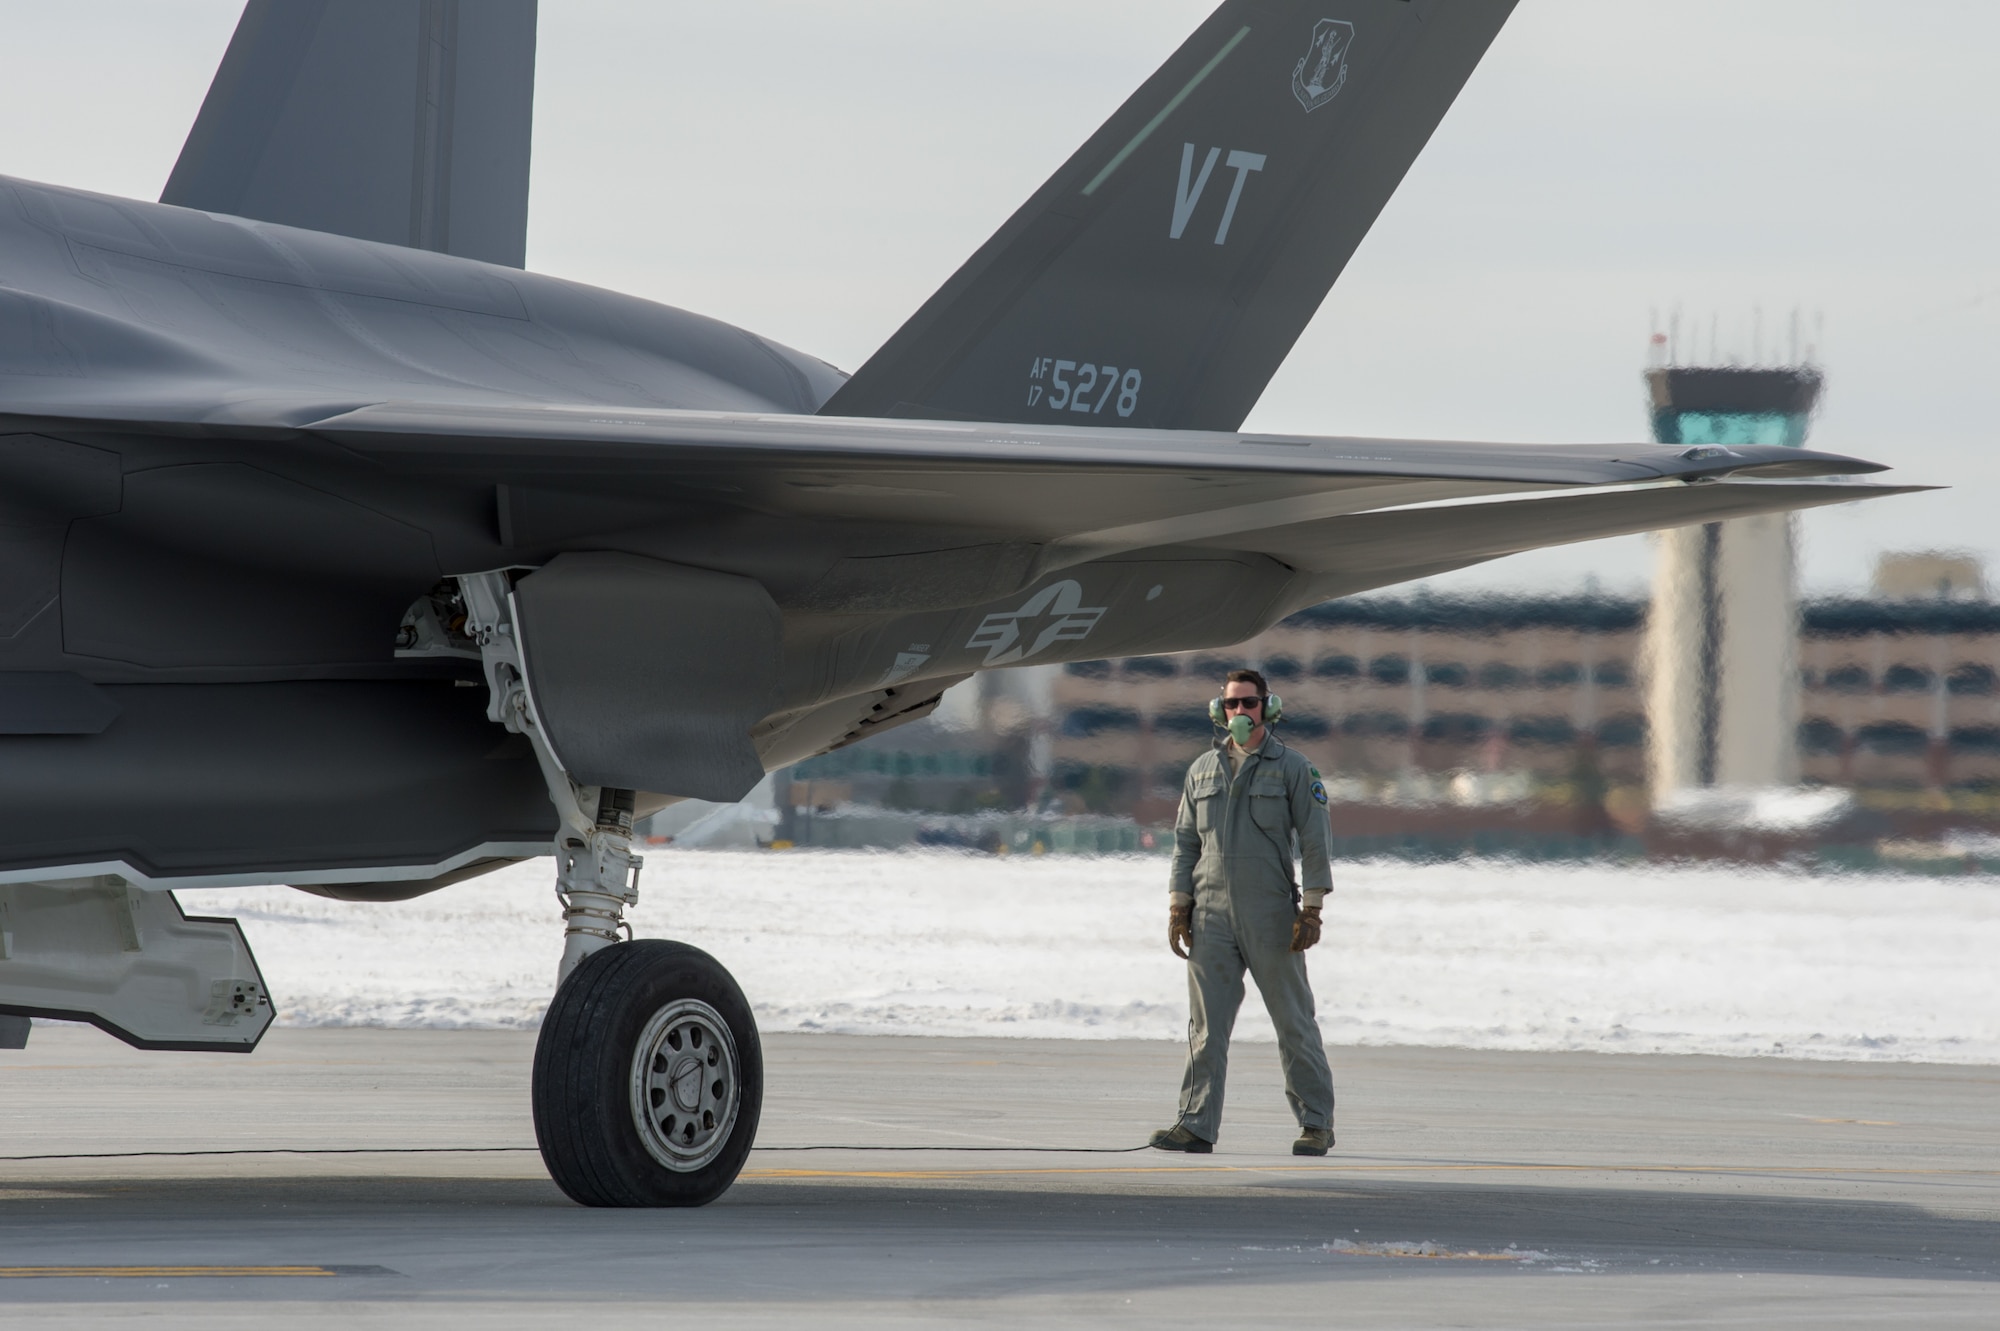 A U.S. Air Force crew chief, assigned to the 158th Fighter Wing's Maintenance Group, Vermont Air National Guard, prepares an F-35 Lightning II for departure from the Burlington Air National Guard Base, Vermont, Vt., Jan. 23, 2020. More than 100 158th FW Airmen traveled to Eglin Air Force Base, Florida, to participate in a training event, titled Southern Lightning, to support flying operations and develop their skills during the training. (U.S. Air National Guard photo by Miss Julie M. Shea)